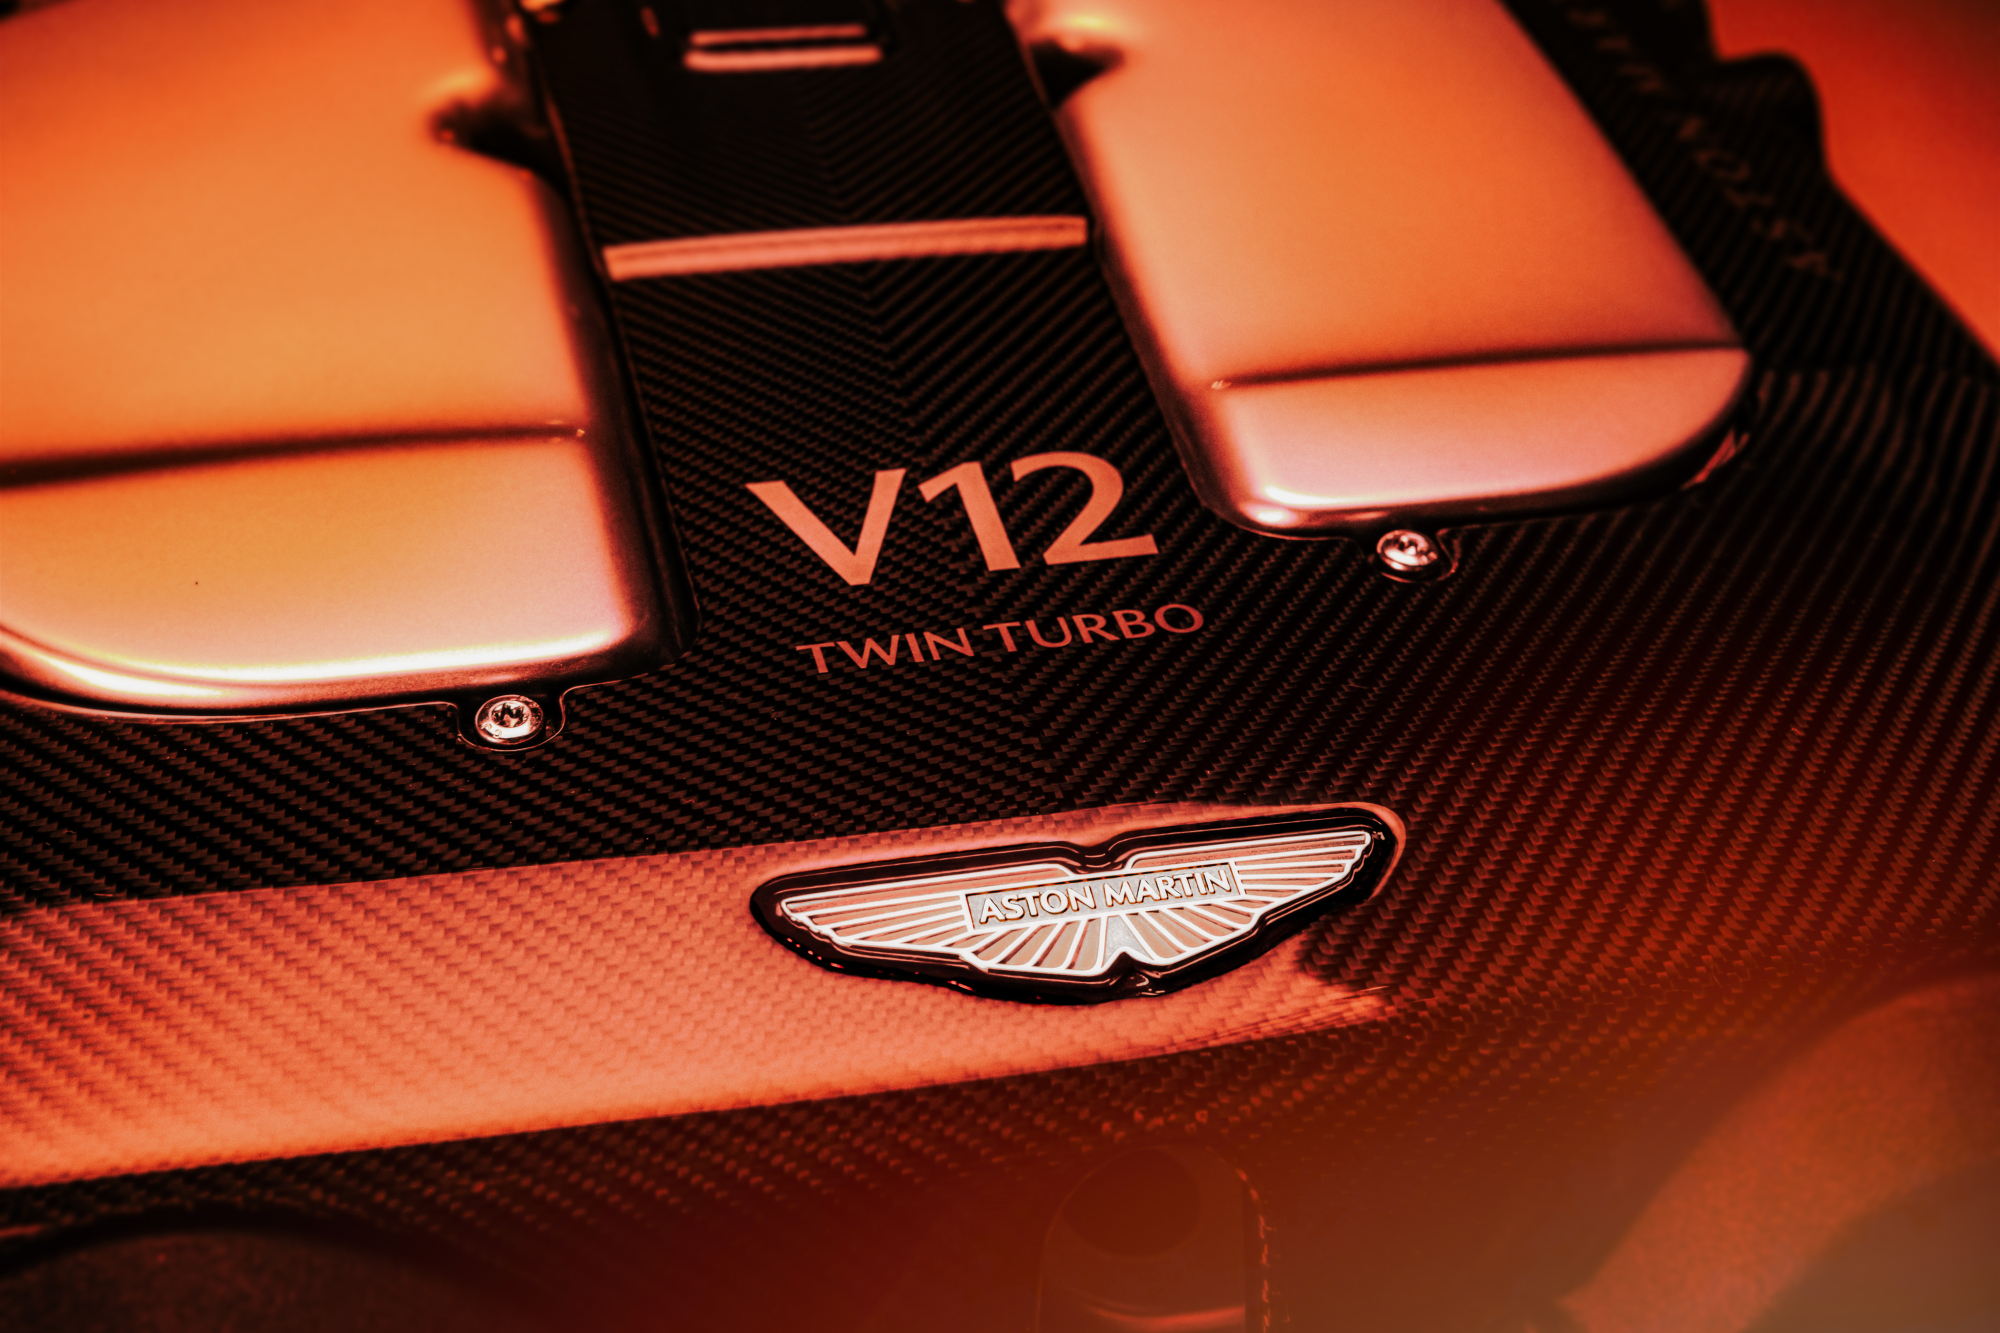 Aston Martin launches a new V12 engine for upcoming flagship and limited edition models.